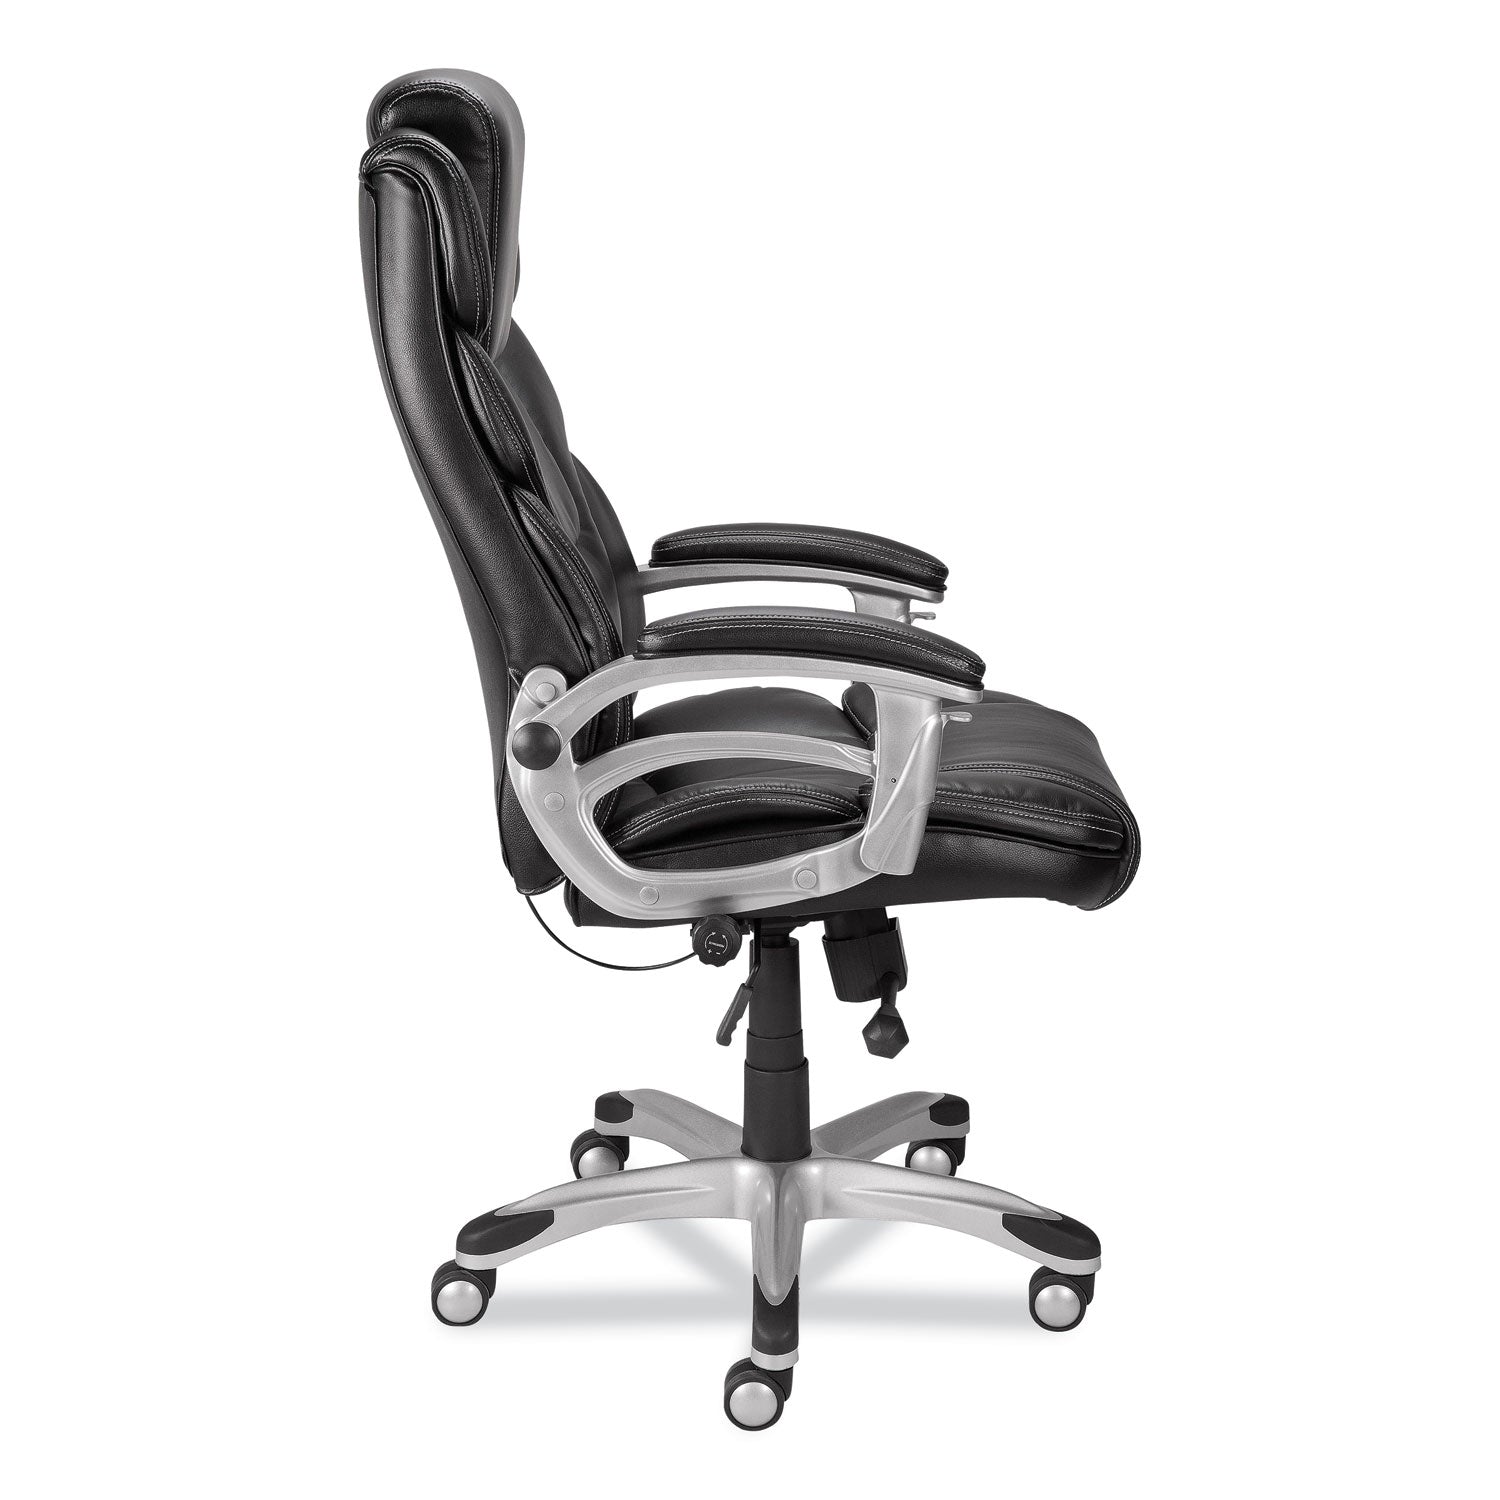 Alera Maurits Highback Chair, Supports Up to 275 lb, Black Seat/Back, Chrome Base - 3